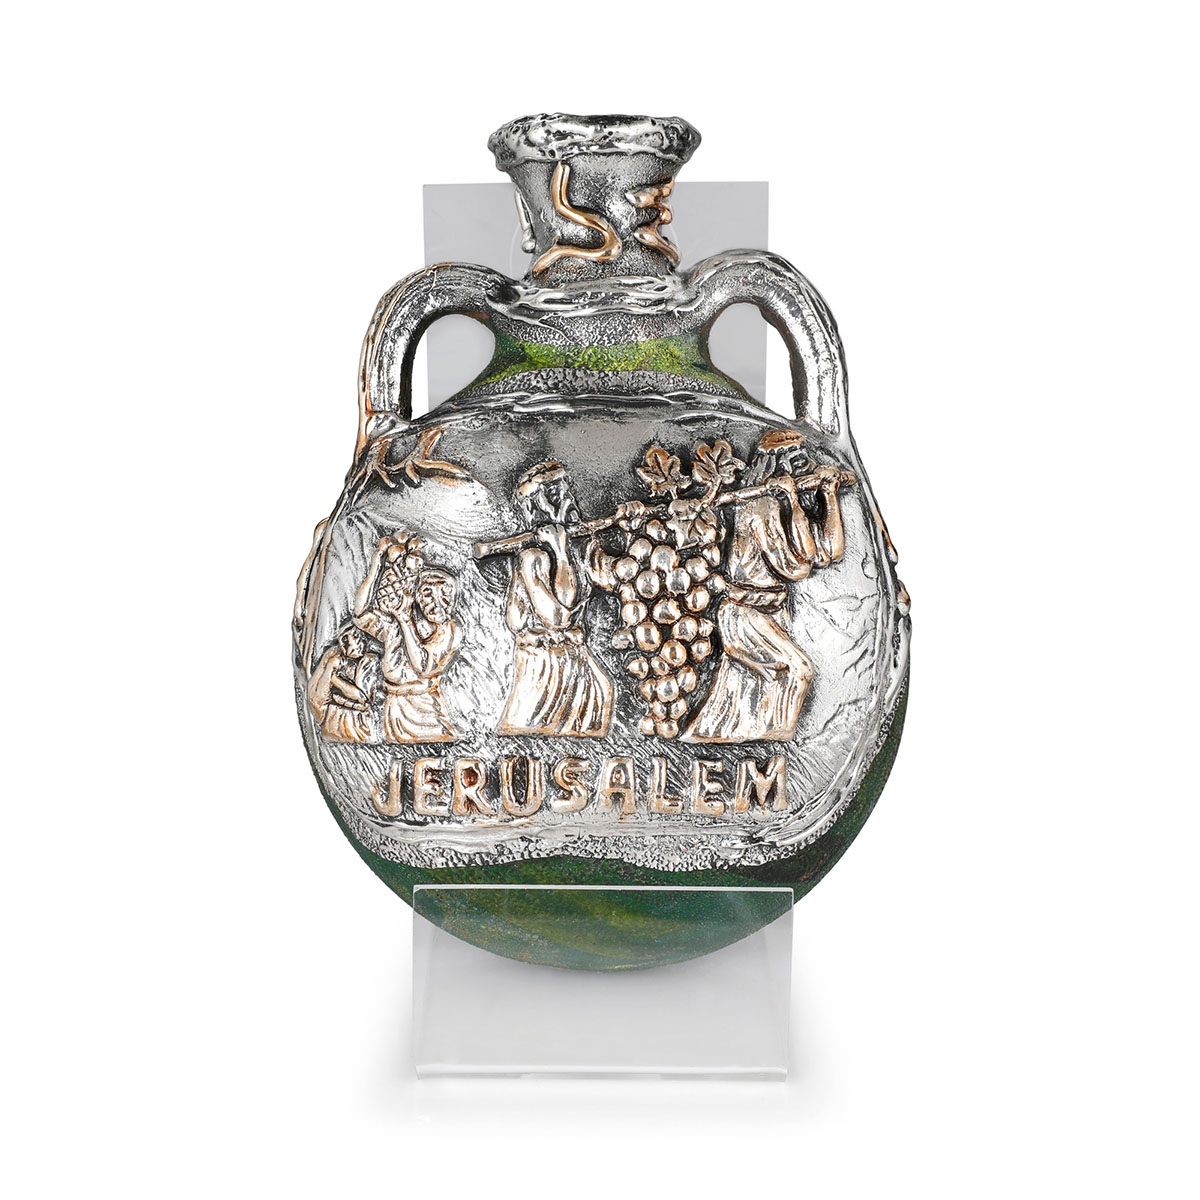 Handmade Rounded Ceramic Jug With Sterling Silver Biblical Design - 1